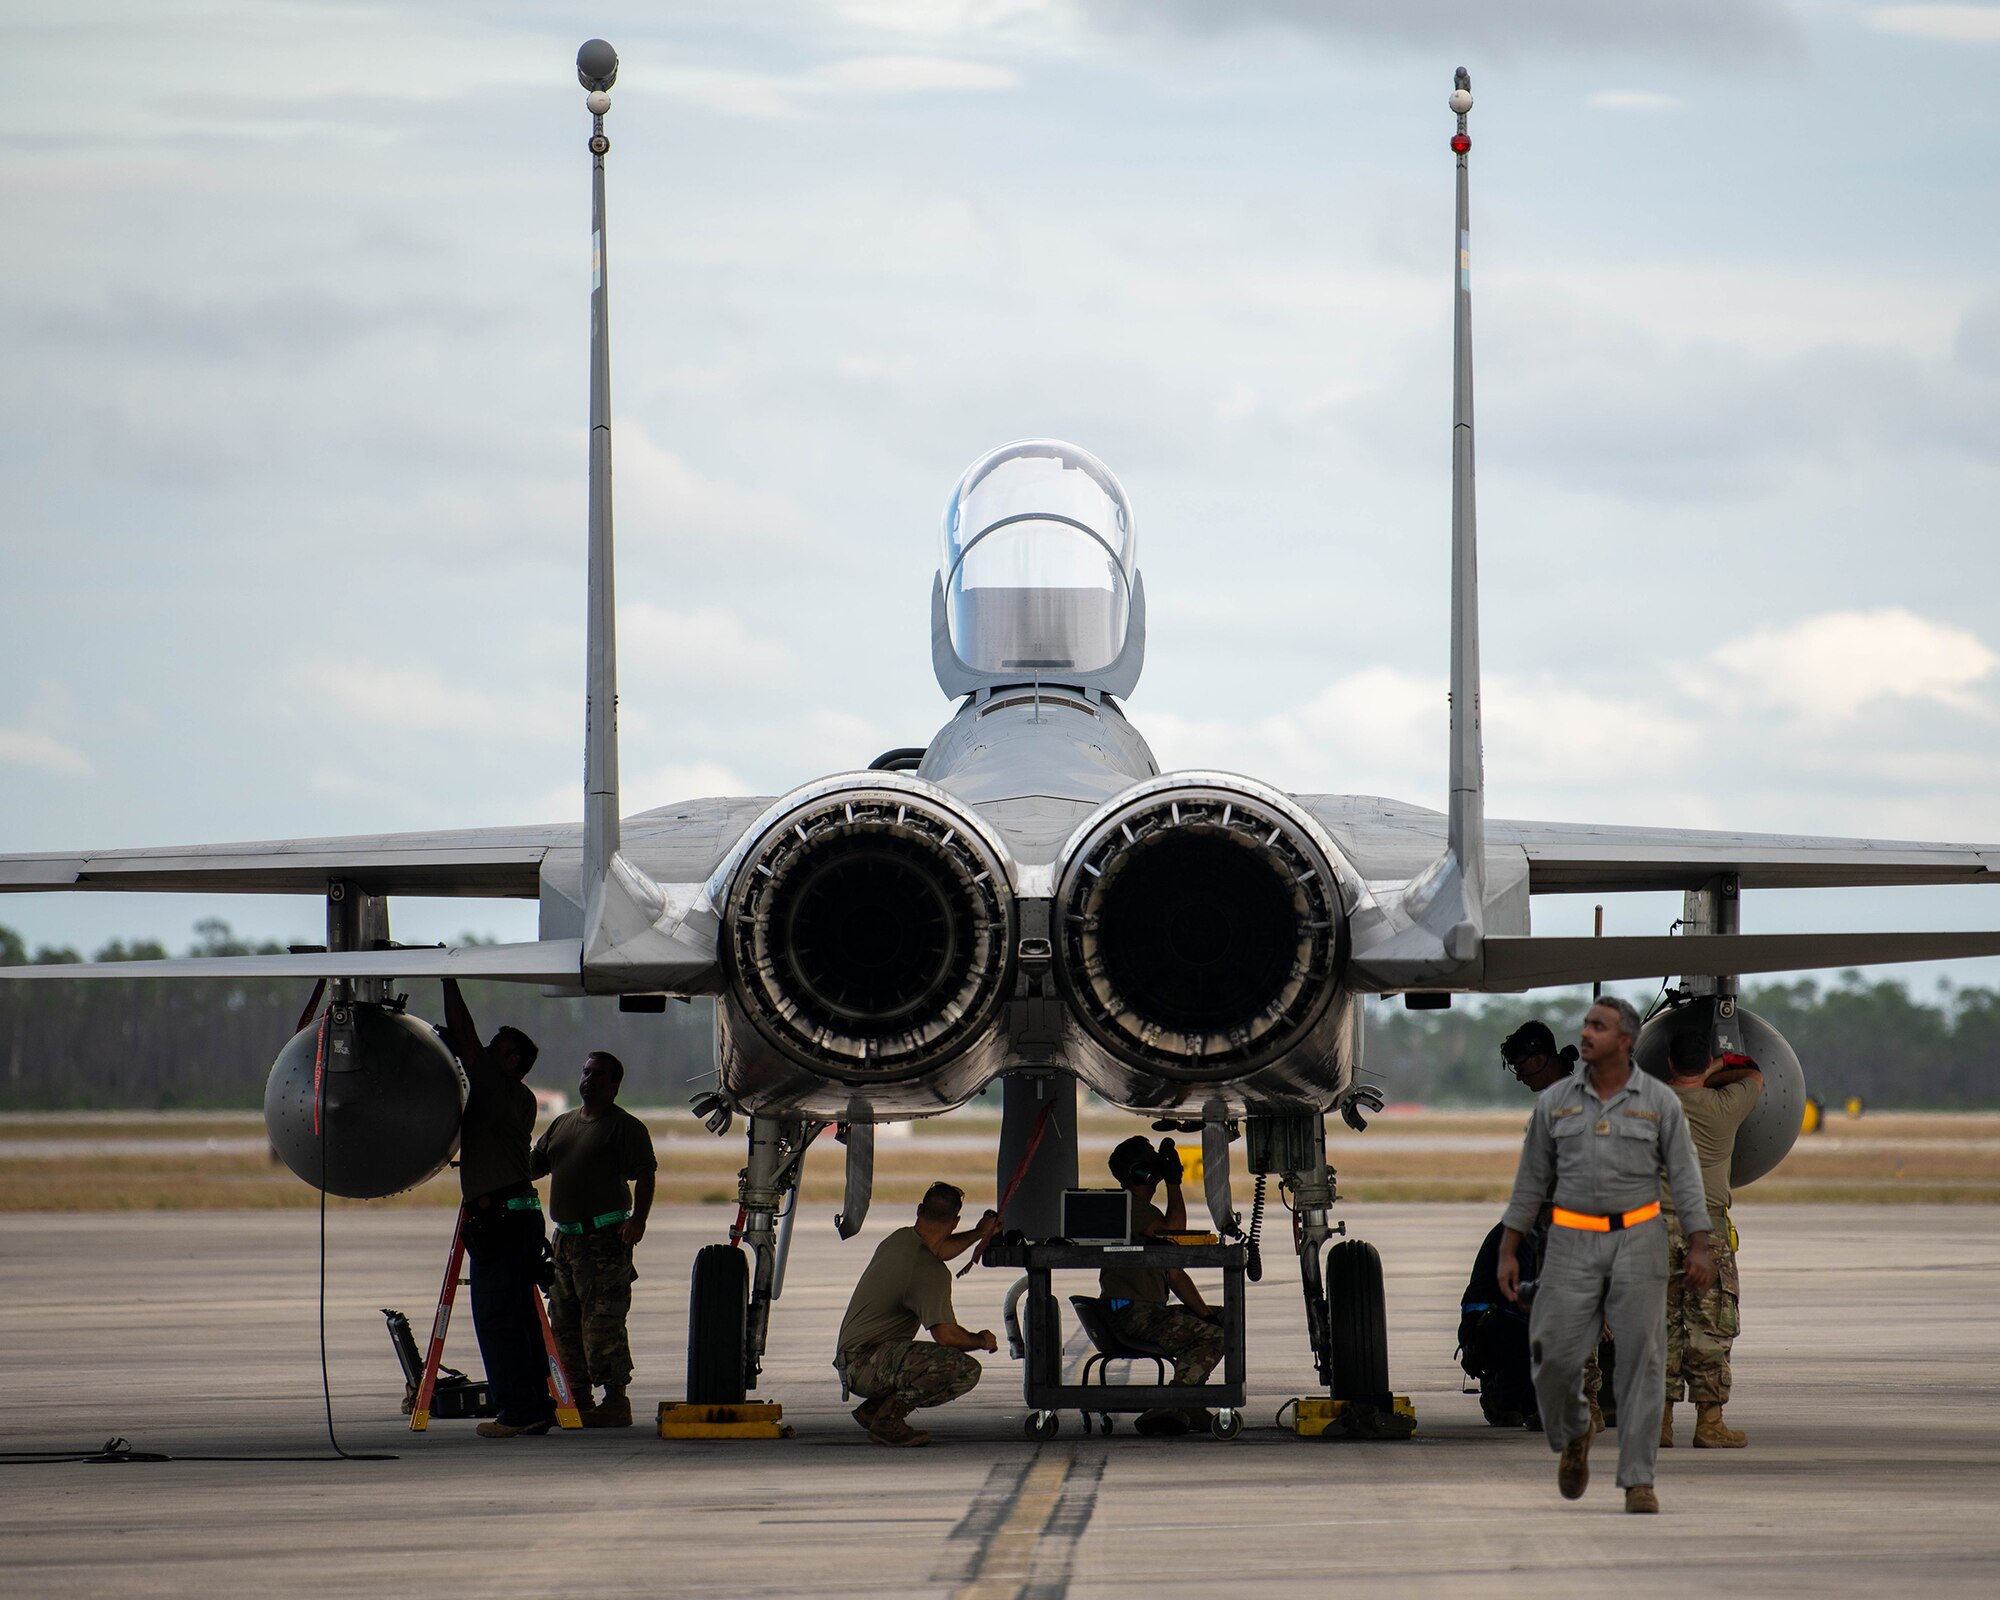 Military members work on a parked jet.